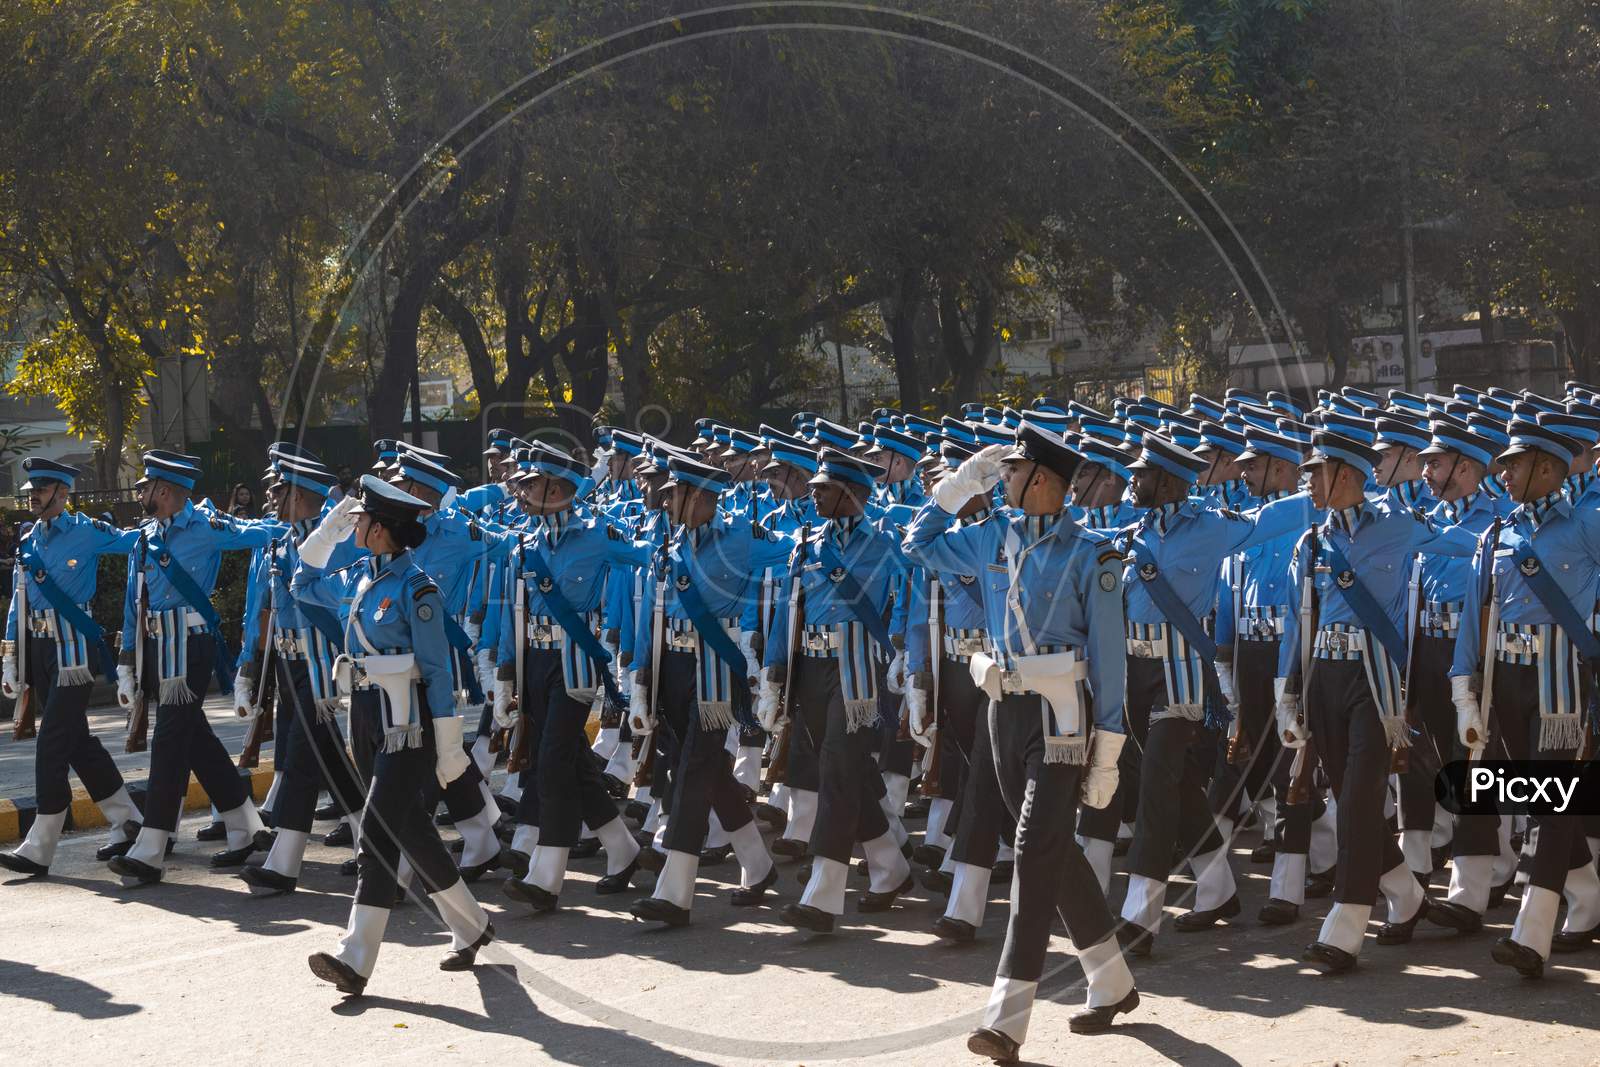 Indian Air Force Air Arm Of The Indian Armed Forces Doing Parade on 71st Republic Day 2020